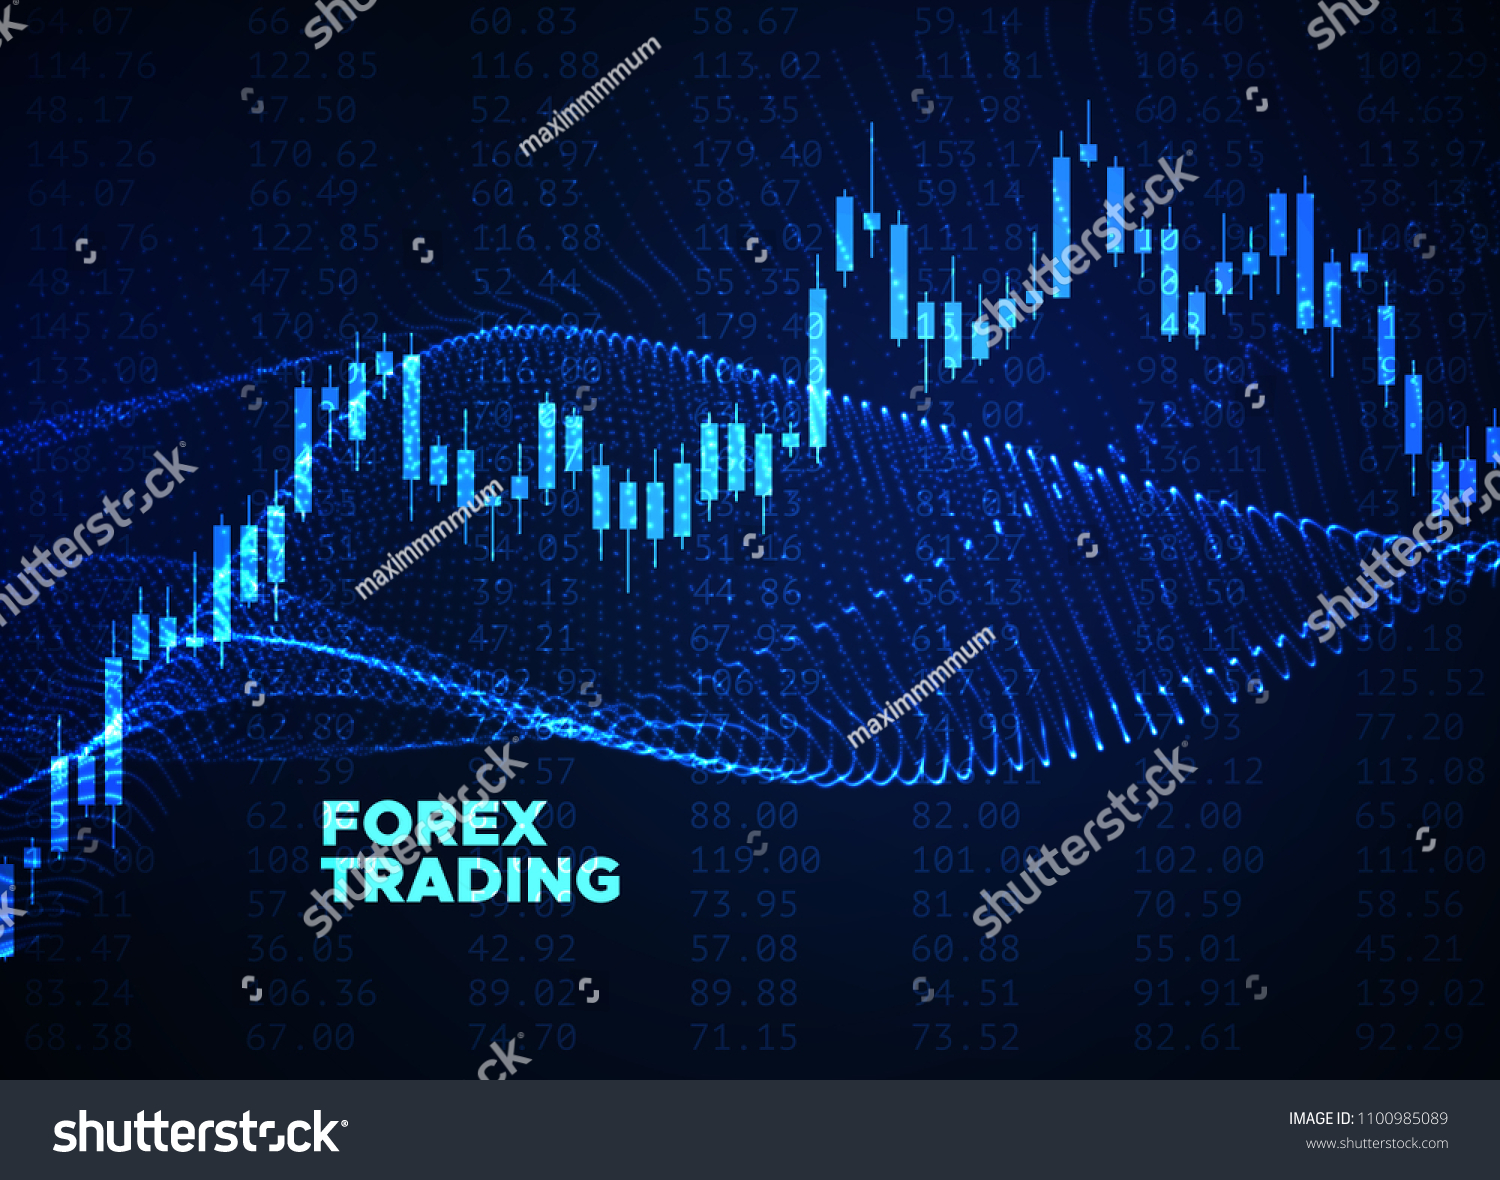 SVG of Abstract financial chart with japanese candlestick chart glowing wavy graphs and numbers. Vector illustration. Financial market data. Forex trading concept. Stock exchange symbol. svg